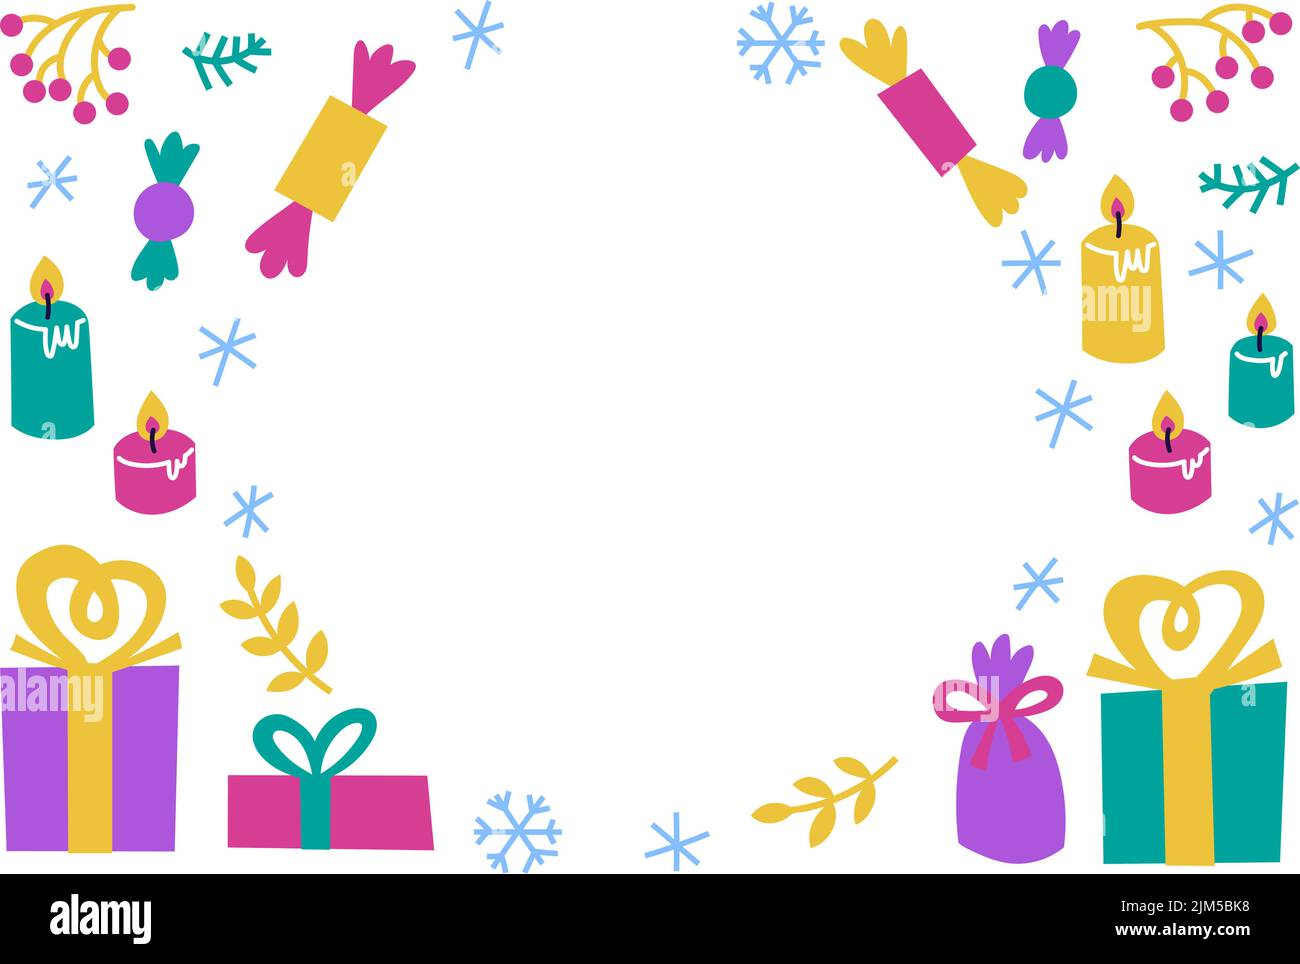 Winter holiday frame with space for text. Stock Vector